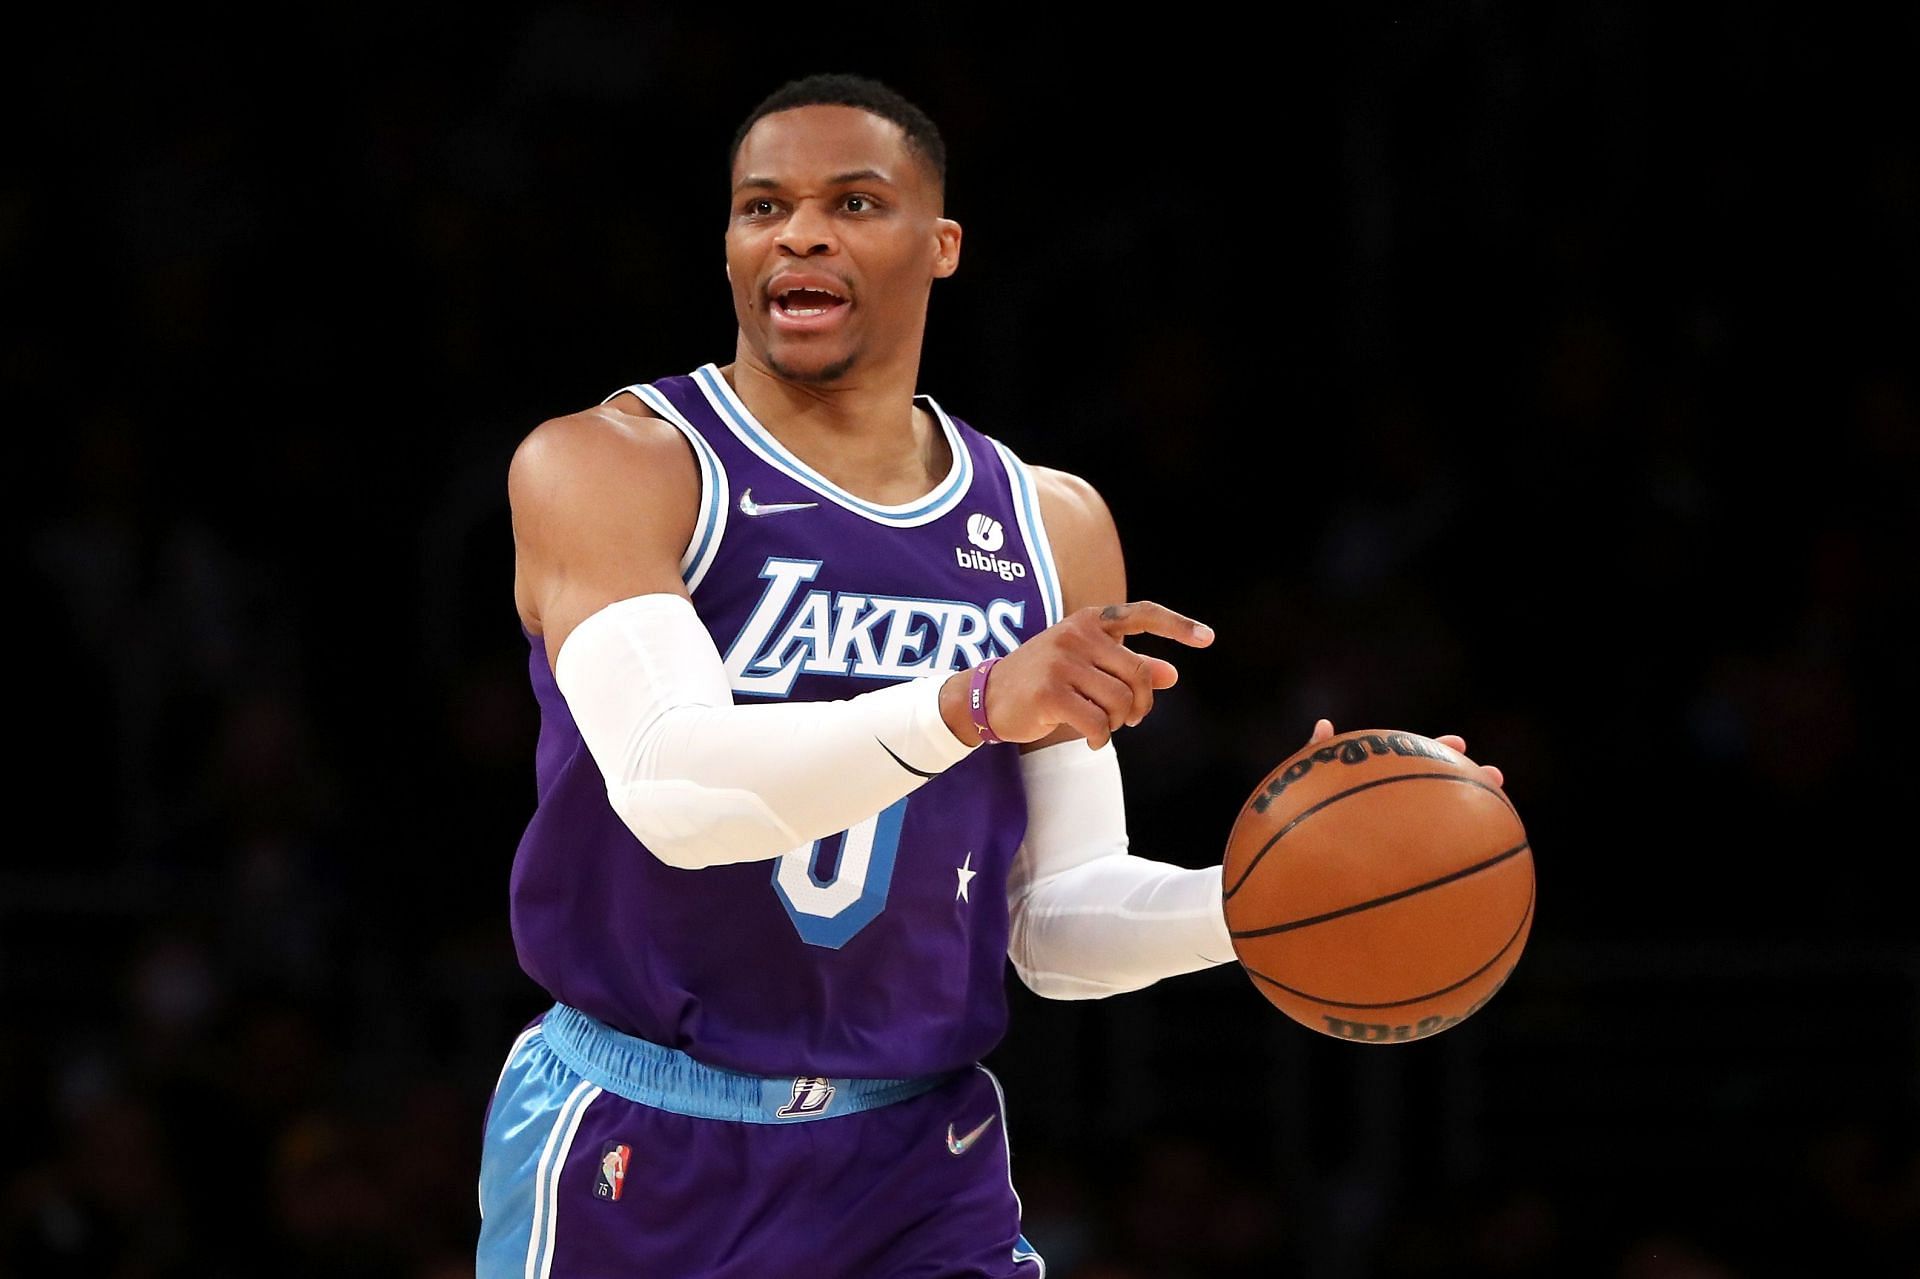 Russell Westbrook made just five field goals for the LA Lakers versus the Dallas Mavericks